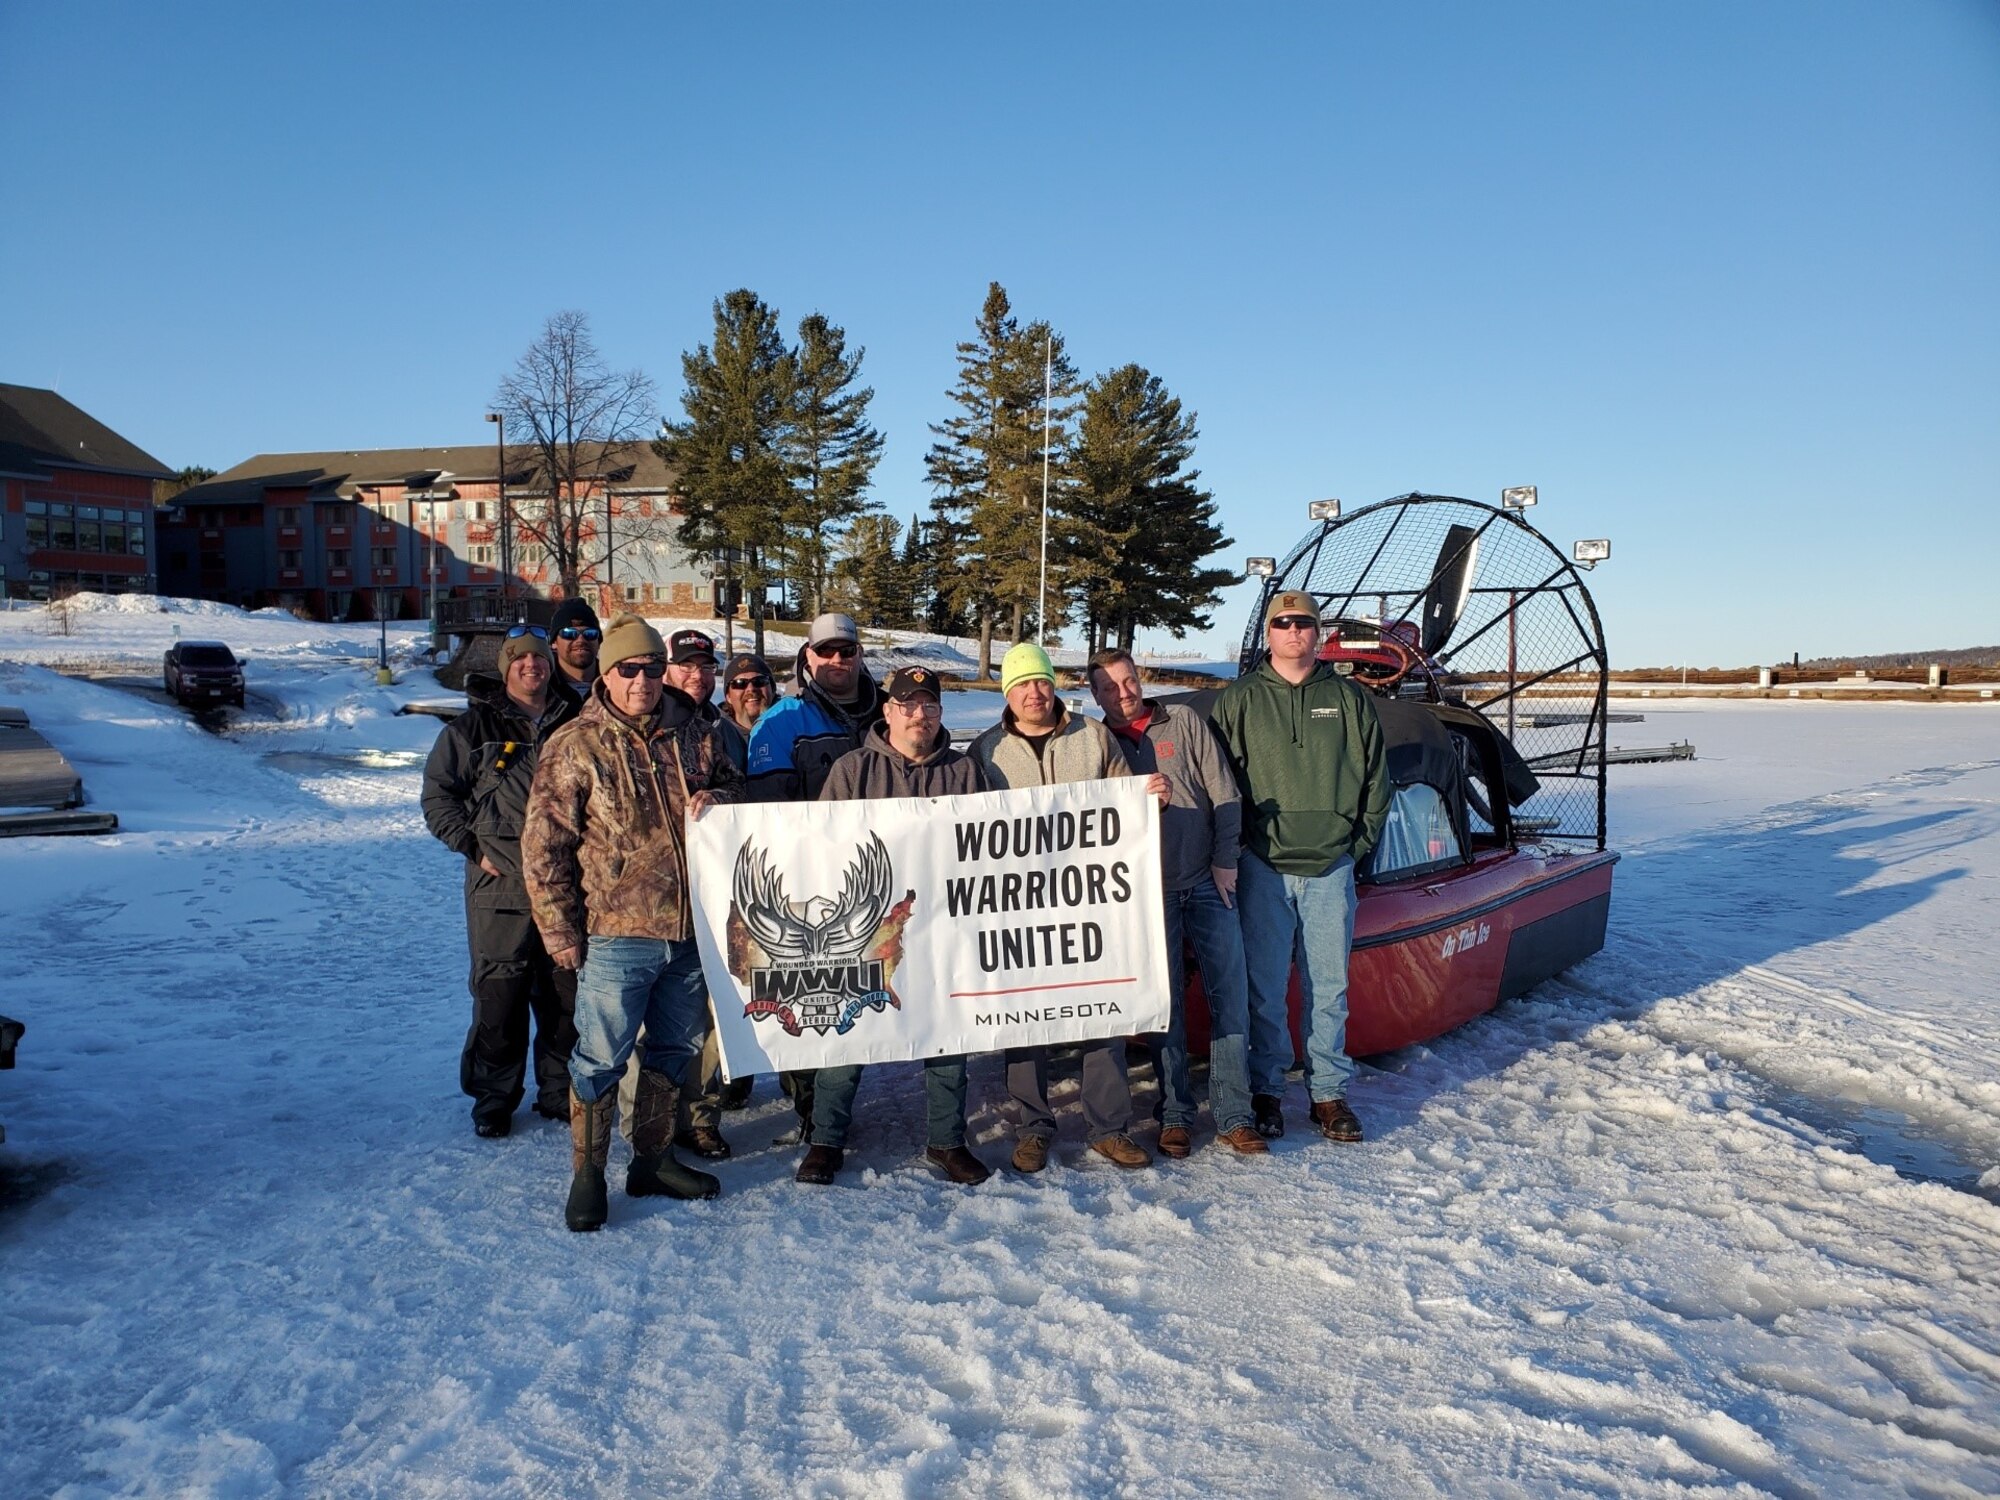 A group of Minnesota Veterans pose for a photo during a Lake Superior ice fishing trip in Duluth, Minnesota, that was planned and paid for by Wounded Warriors United – Minnesota. Wounded Warriors United – Minnesota is a 501C3 non-profit organization that takes wounded and combat veterans living in Minnesota on fully-funded, outdoor hunting, fishing, and camping adventures. The organization was founded by Aircraft Armament Systems Specialist, Tech. Sgt. Logan Shiflett, assigned 148th Fighter Wing, Minnesota Air National Guard, Duluth, Minnesota. (courtesy photo)